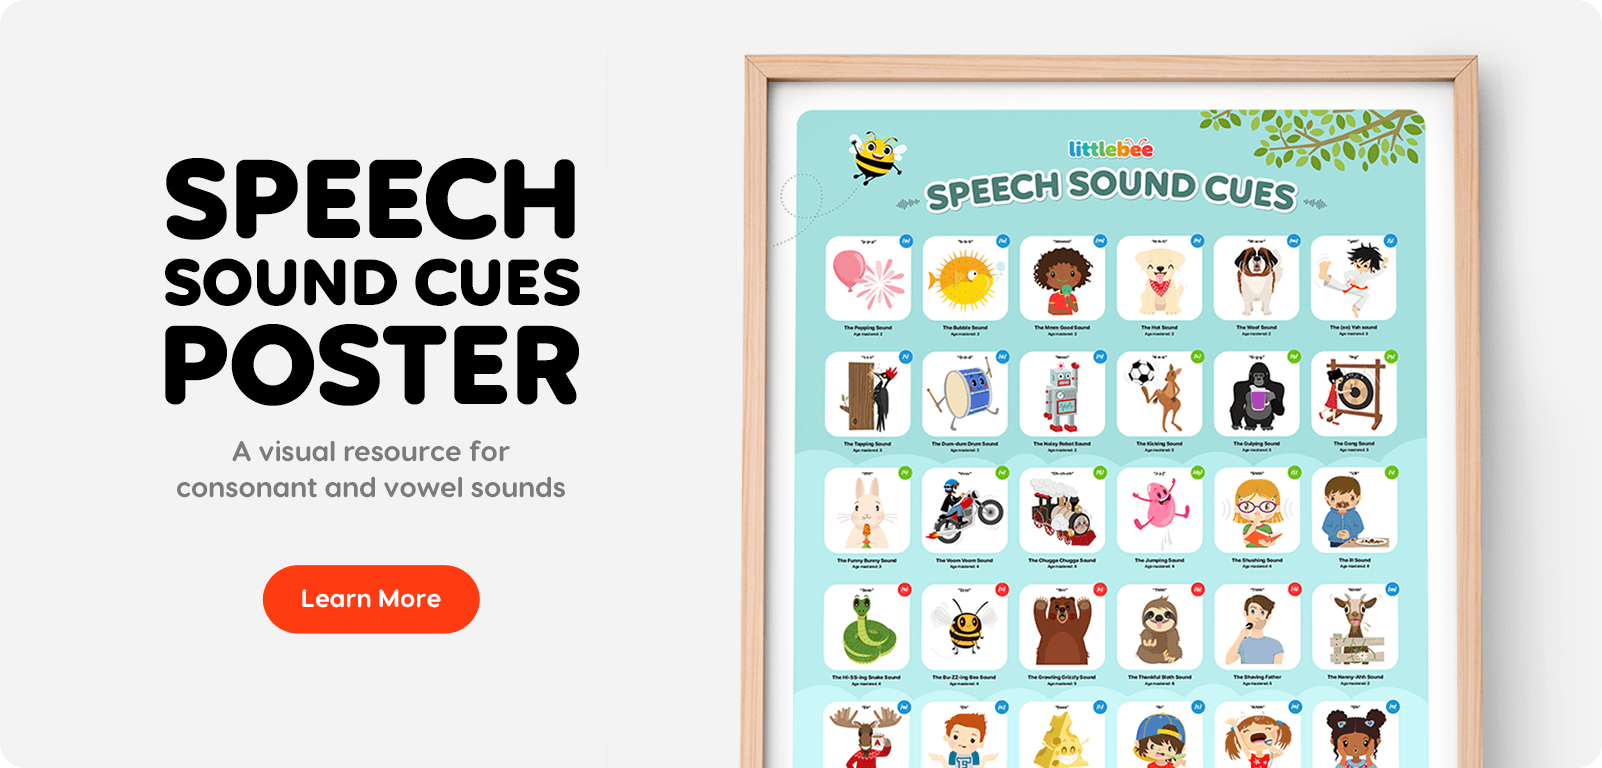 Little Bee Speech Sound Cues Poster with consonants and vowels